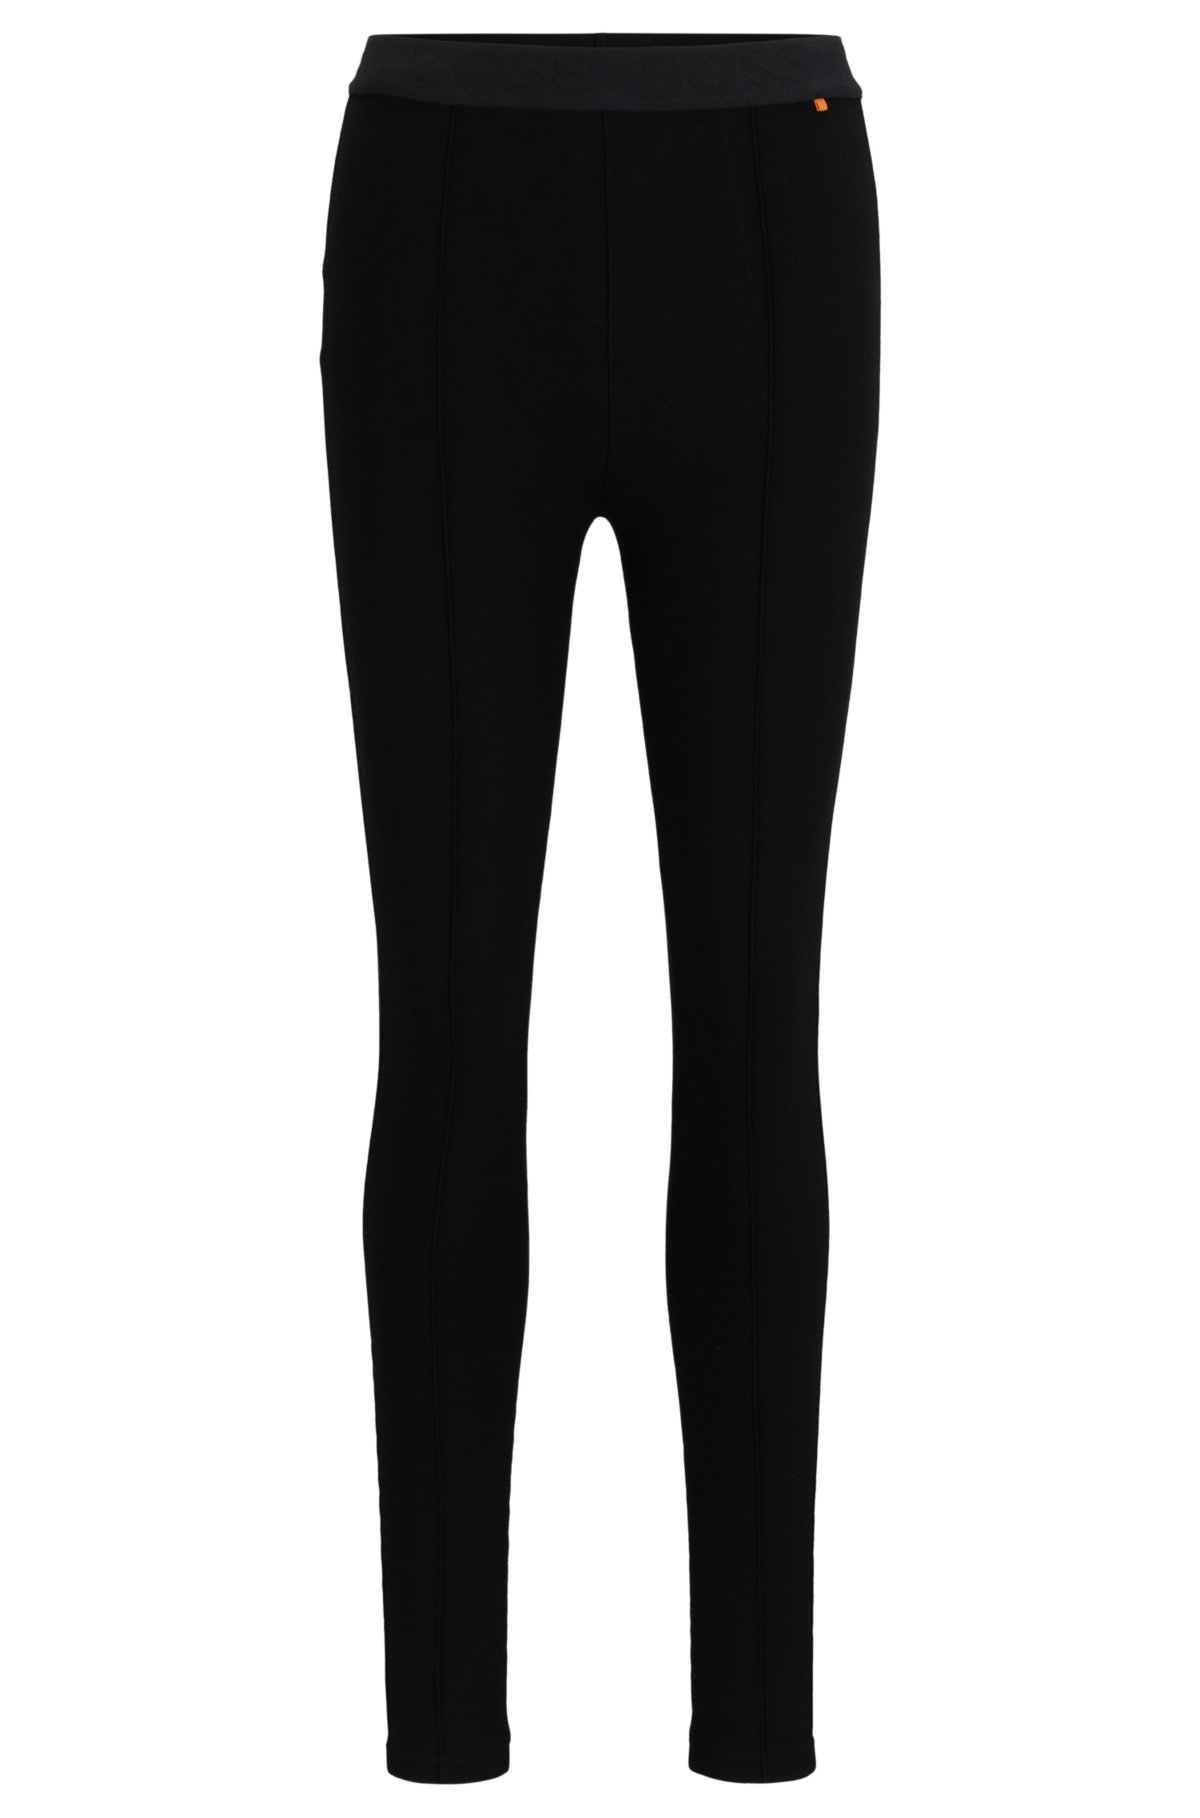 Extra-slim-fit leggings in power-stretch jersey, Black